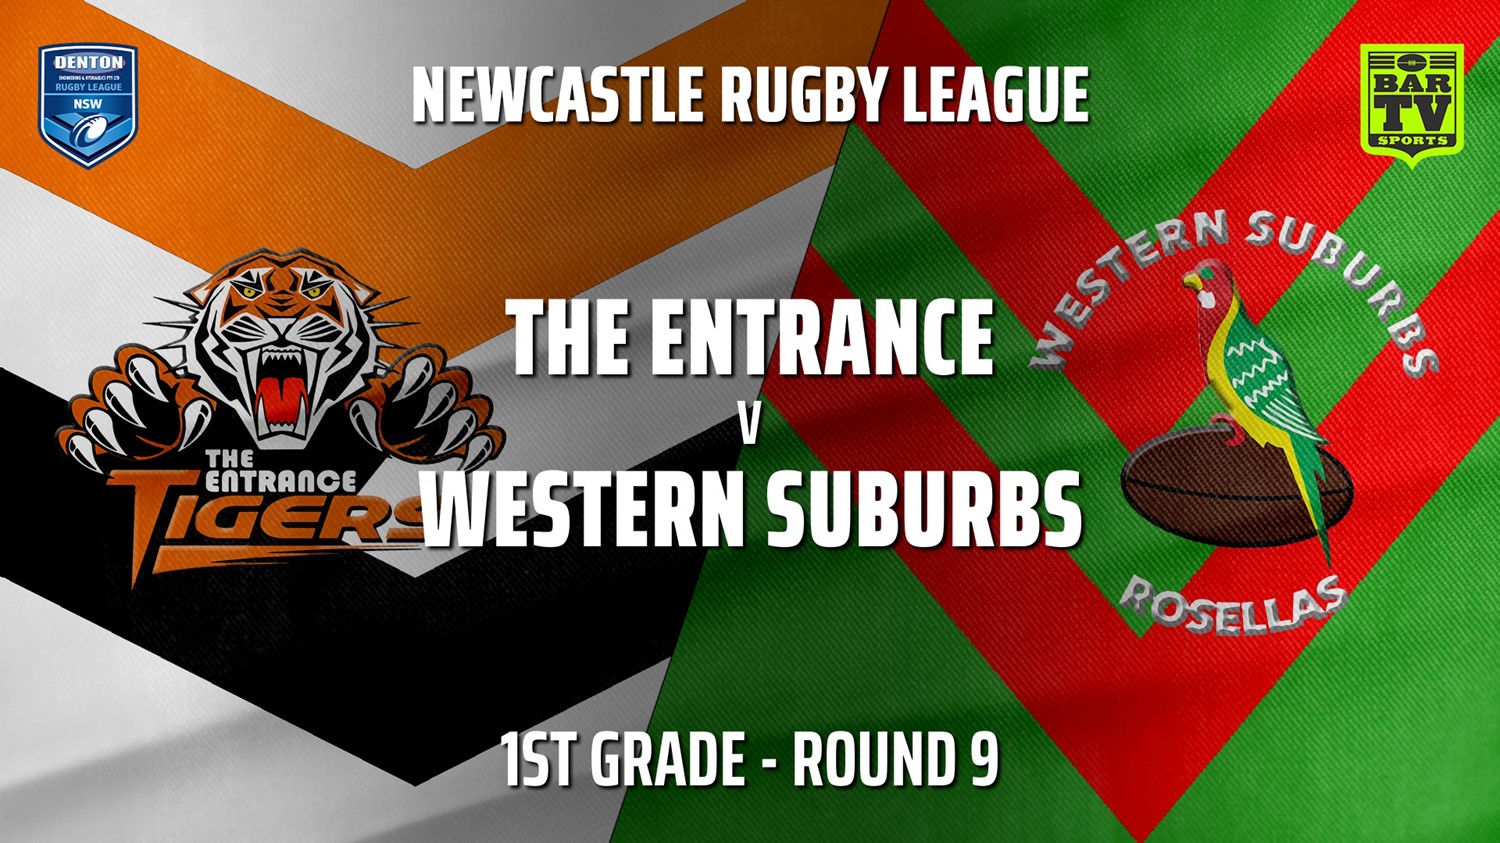 210530-Newcastle Rugby League Round 9 - 1st Grade - The Entrance Tigers v Western Suburbs Rosellas Minigame Slate Image